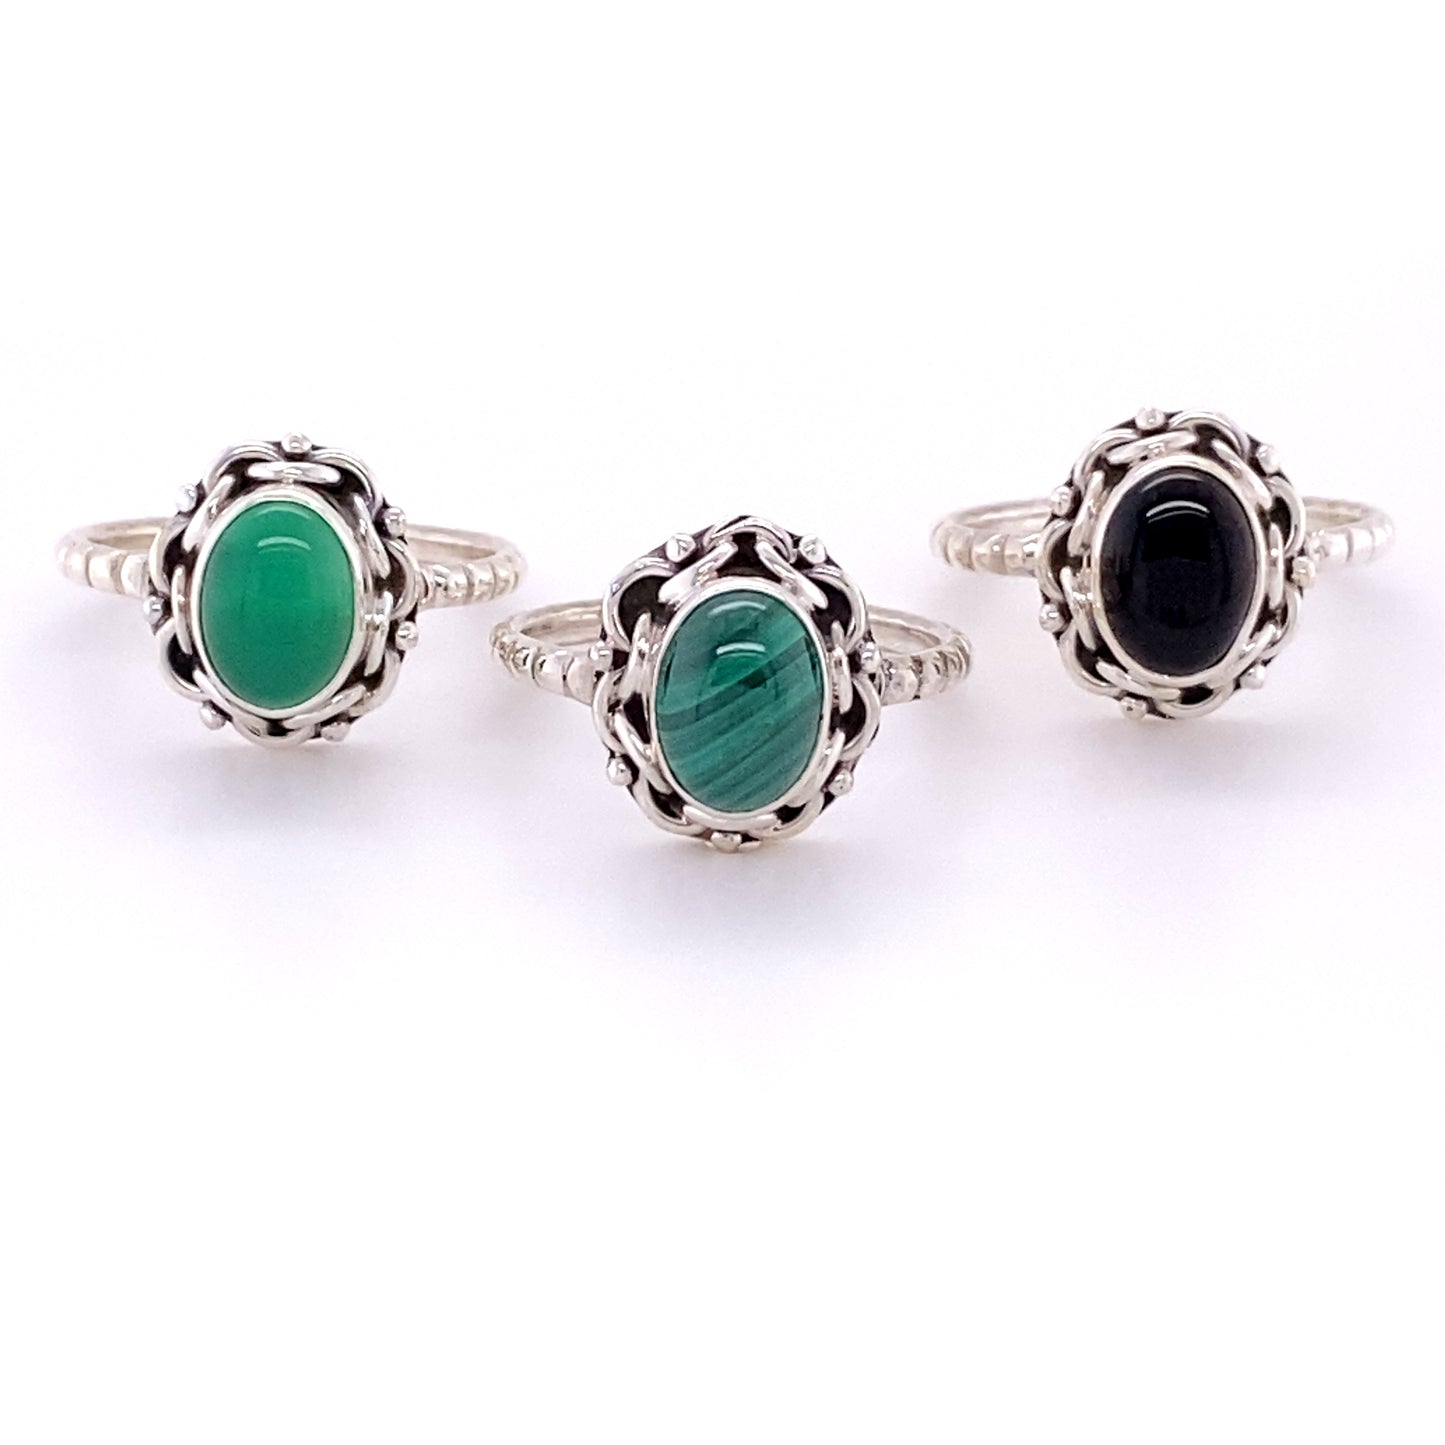 Three Natural Oval Gemstone Rings with Intricate chain Border and Textured Band.